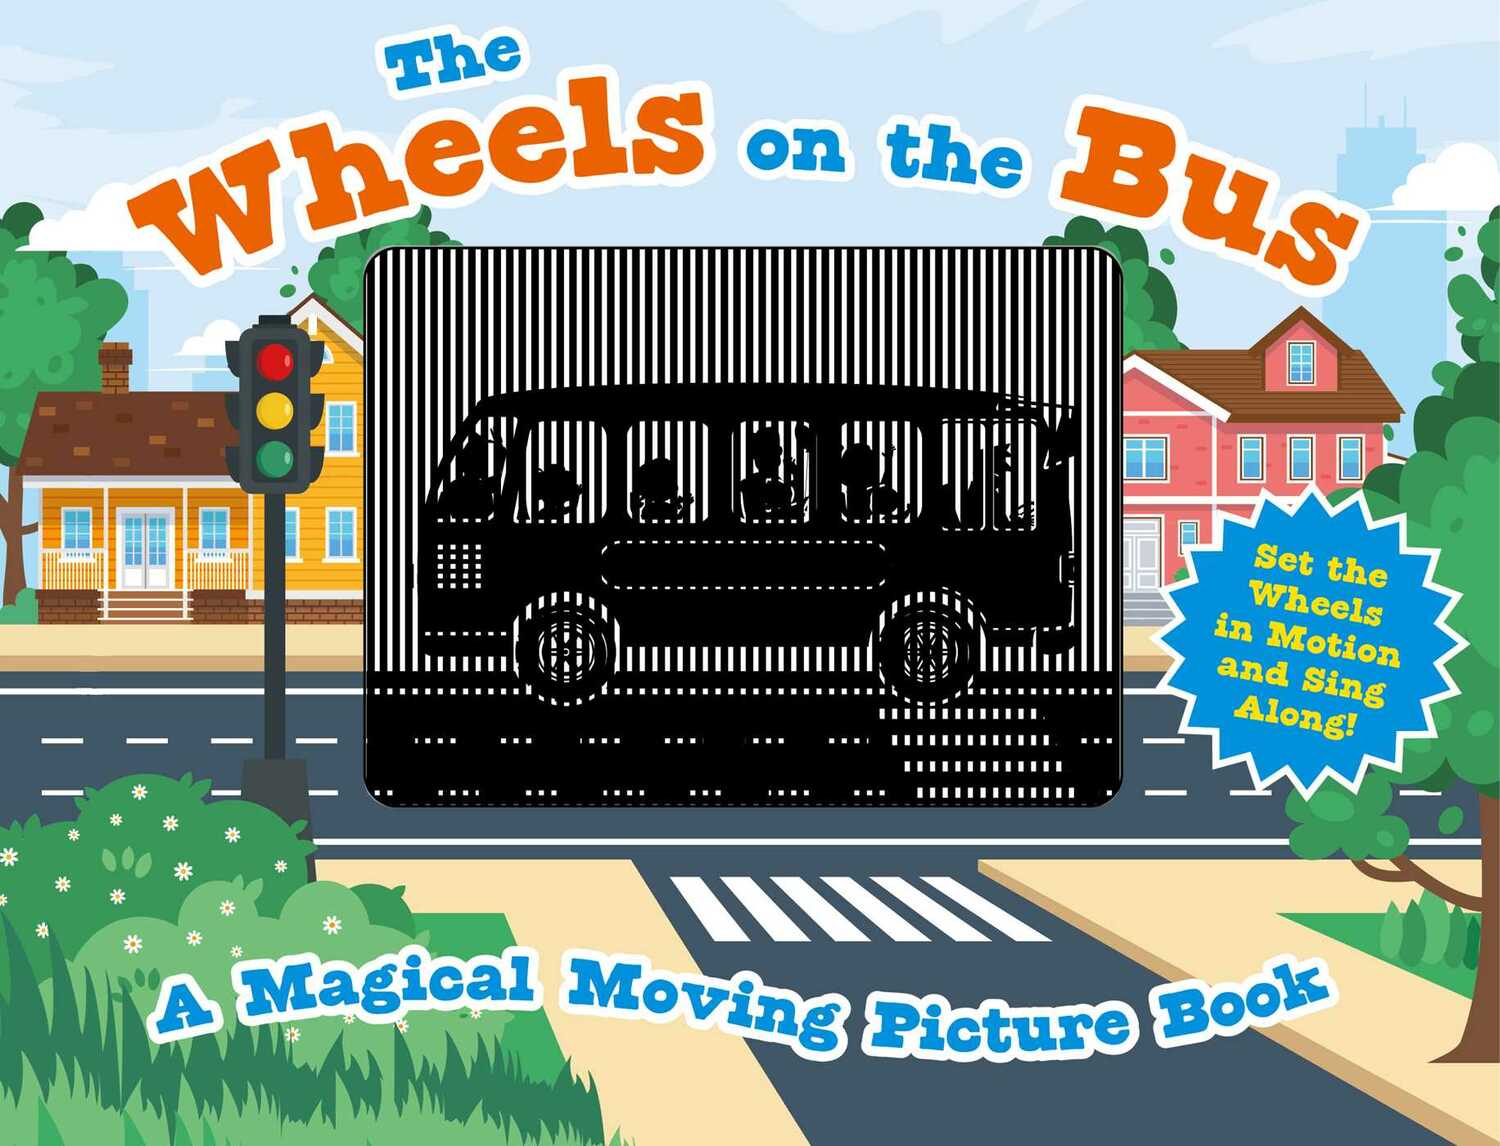 The Wheels on the Bus: A Sing-A-Long Moving Animation Book (Kid&#39;s Songs, Nursery Rhymes, Animated Book, Children&#39;s Book)